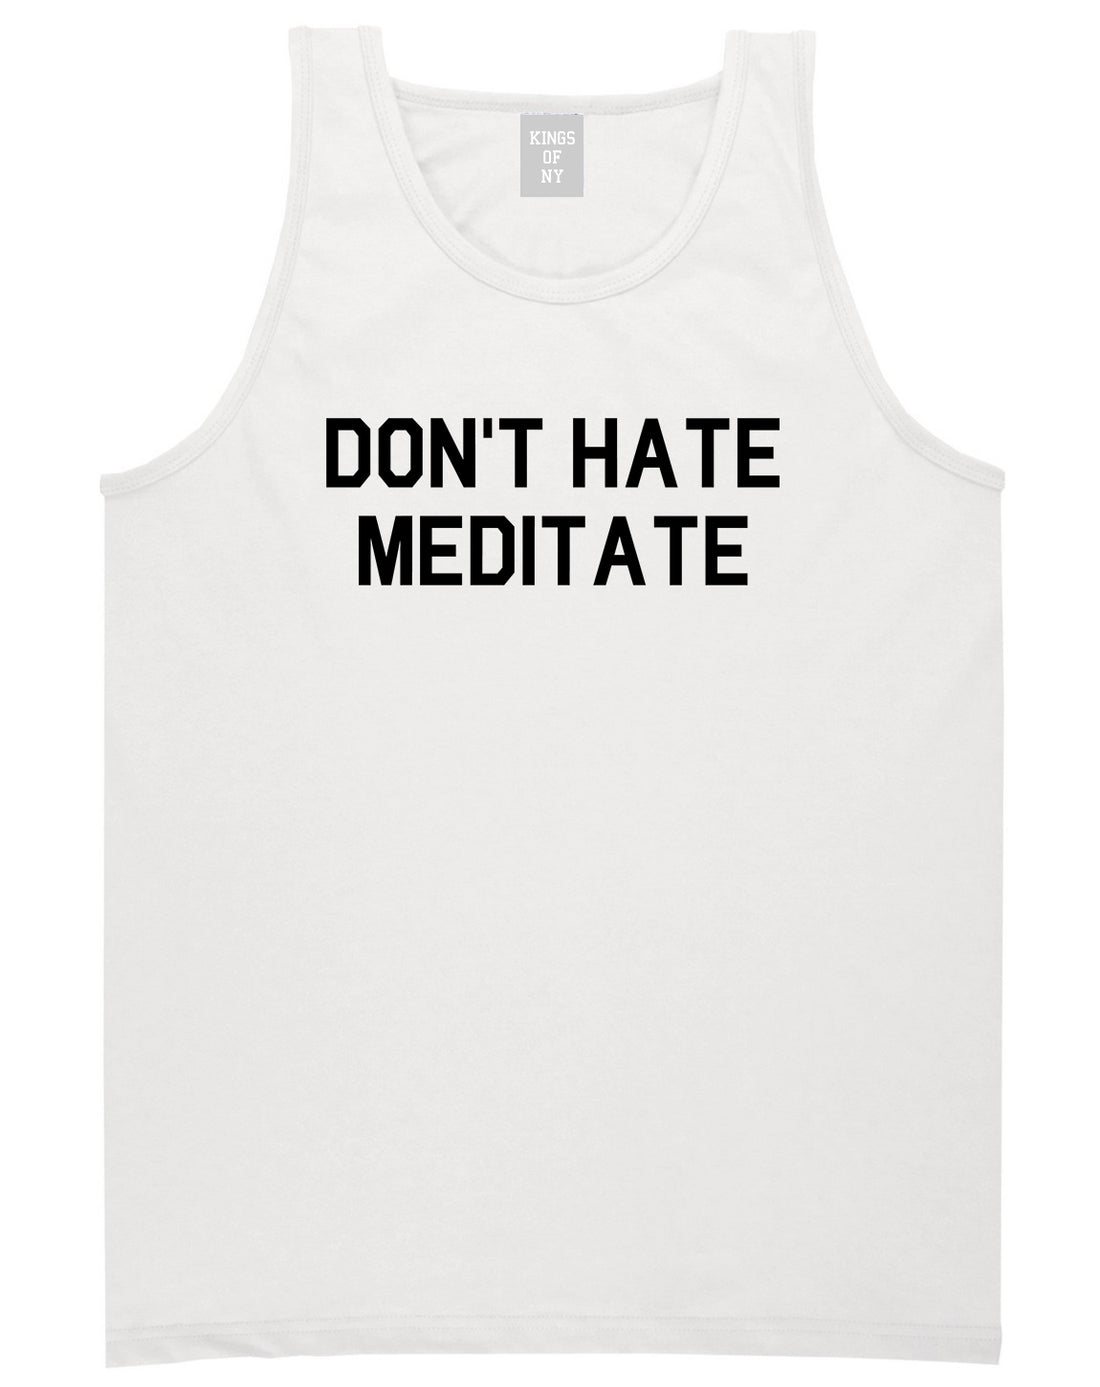 Dont_Hate_Meditate Mens White Tank Top Shirt by Kings Of NY